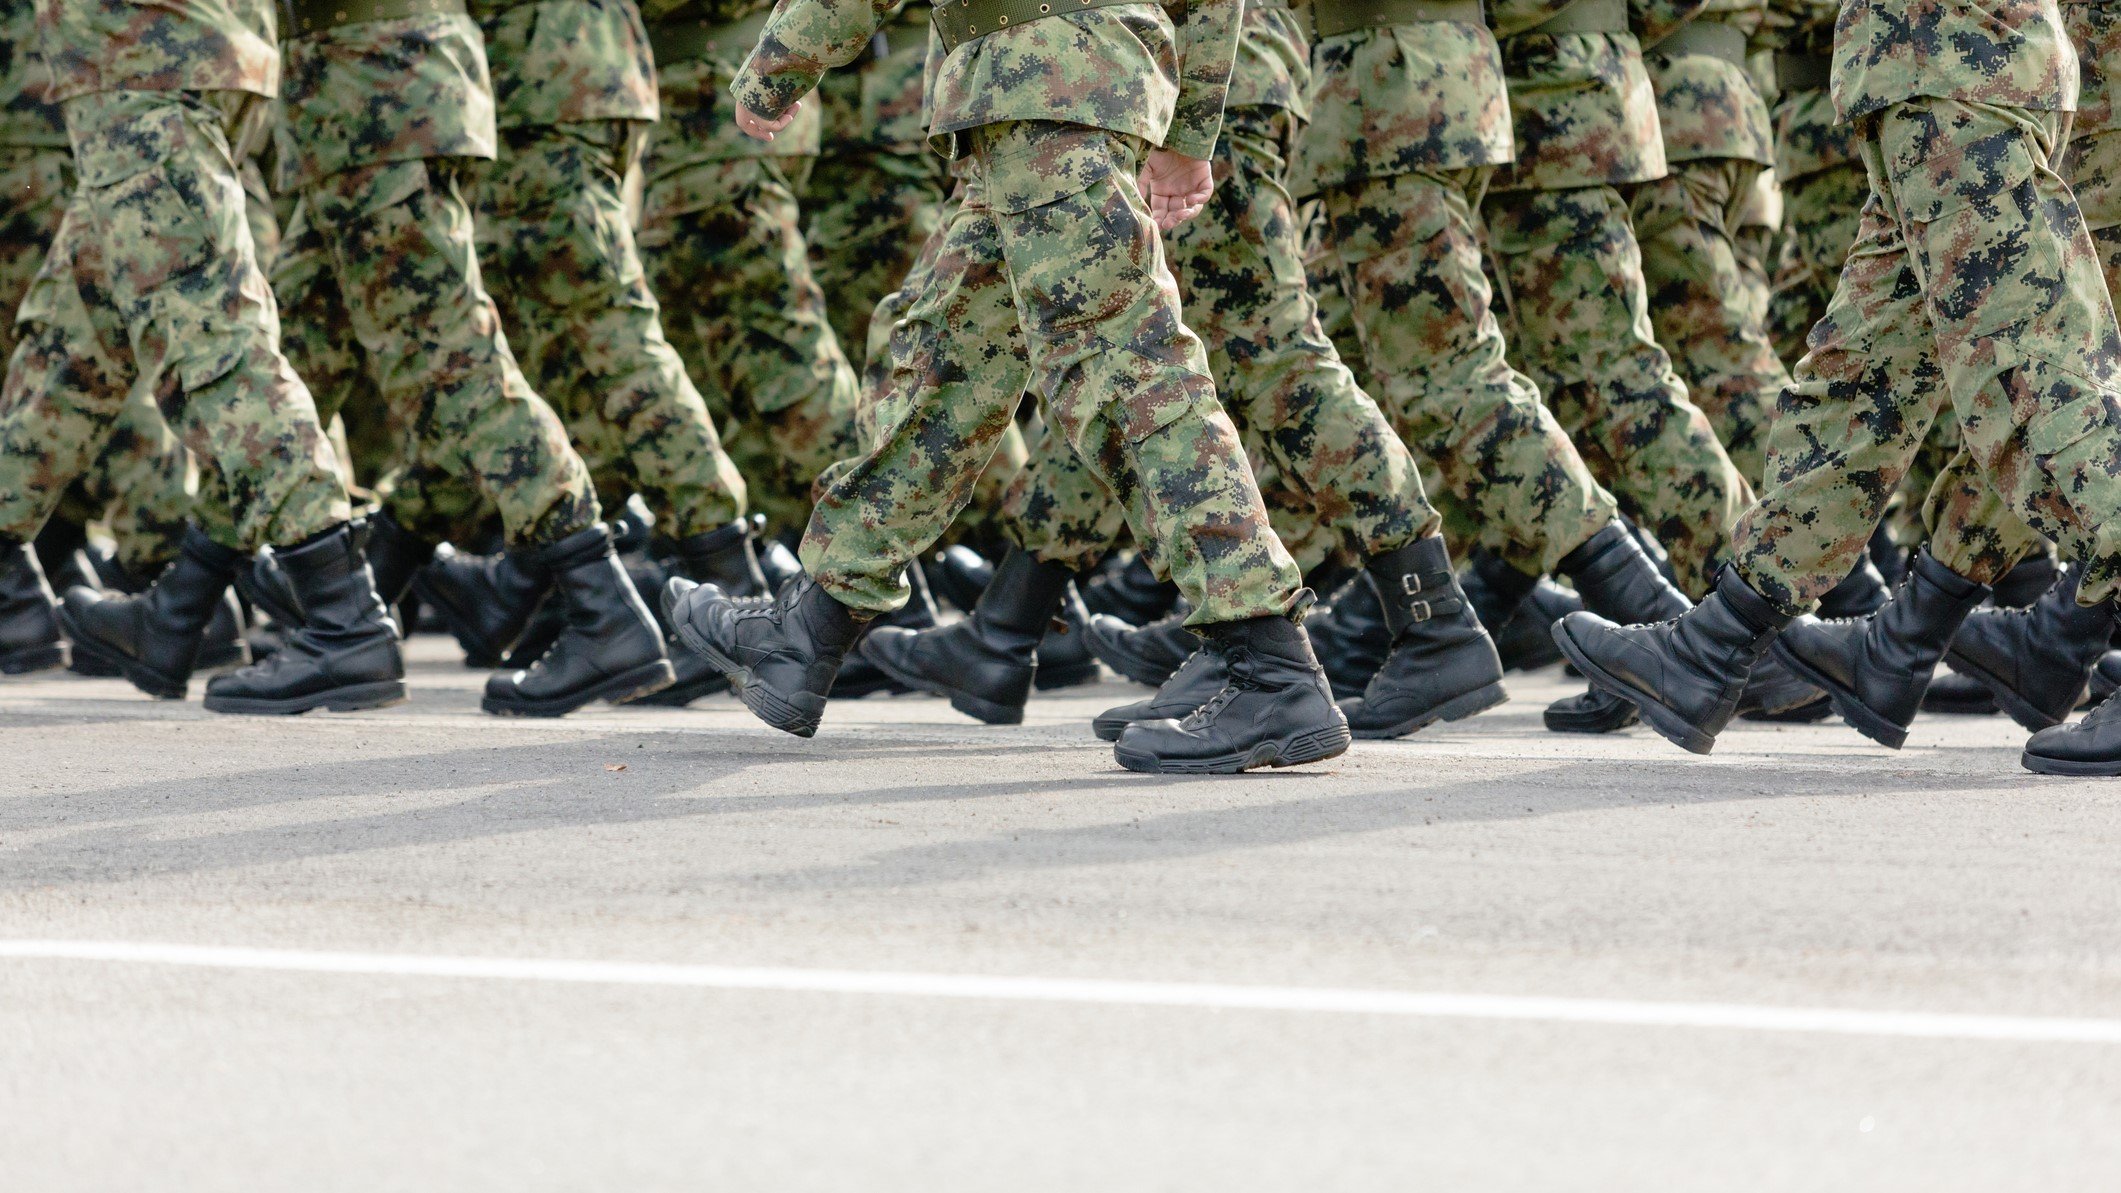 Army soldiers march marching military